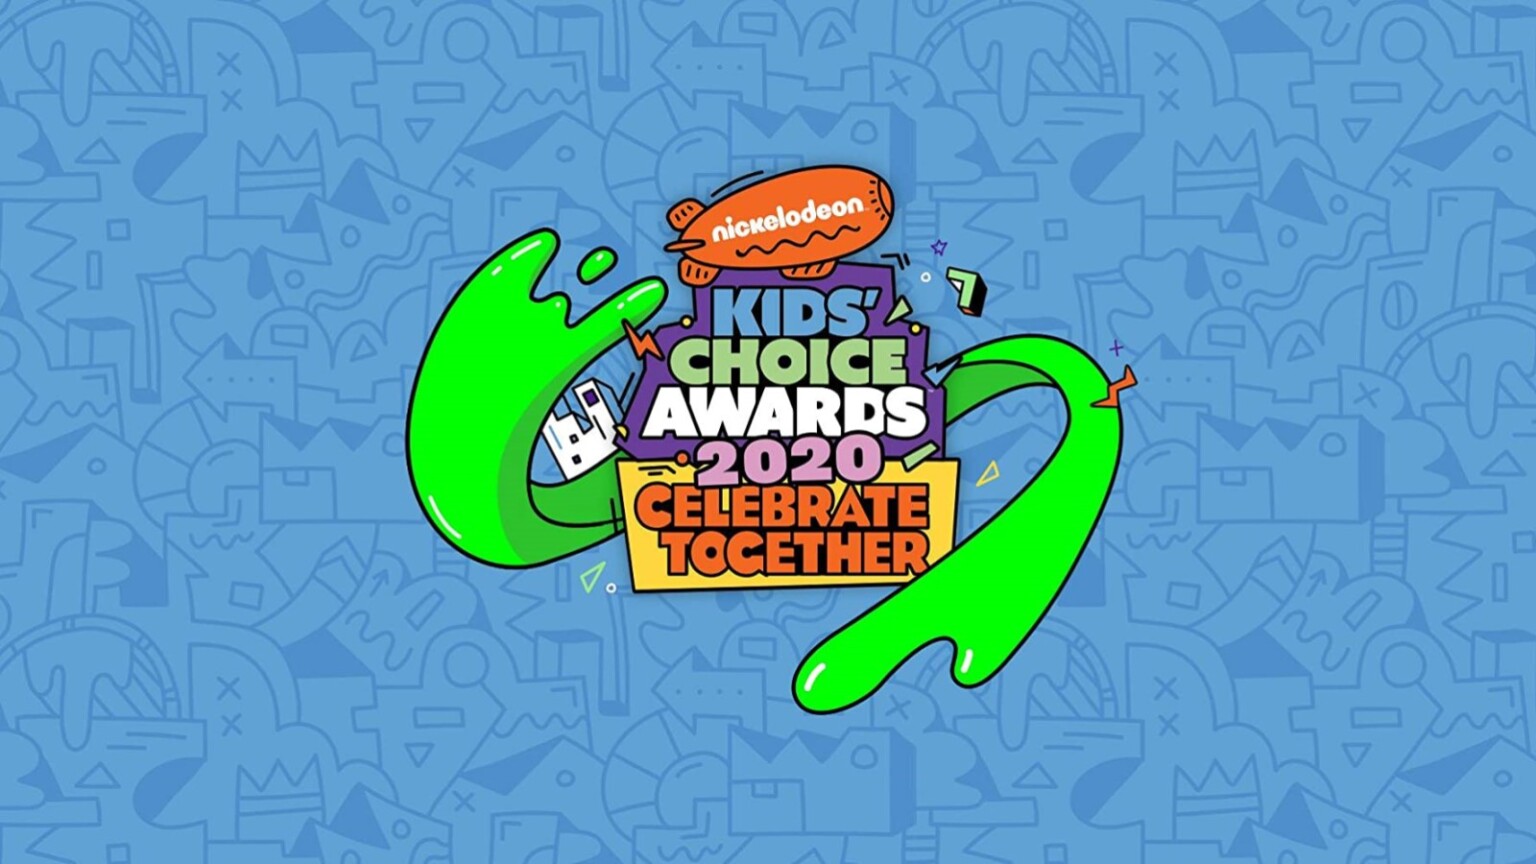 How to Watch the '2020 Kids' Choice Awards (KCA)' Live Online